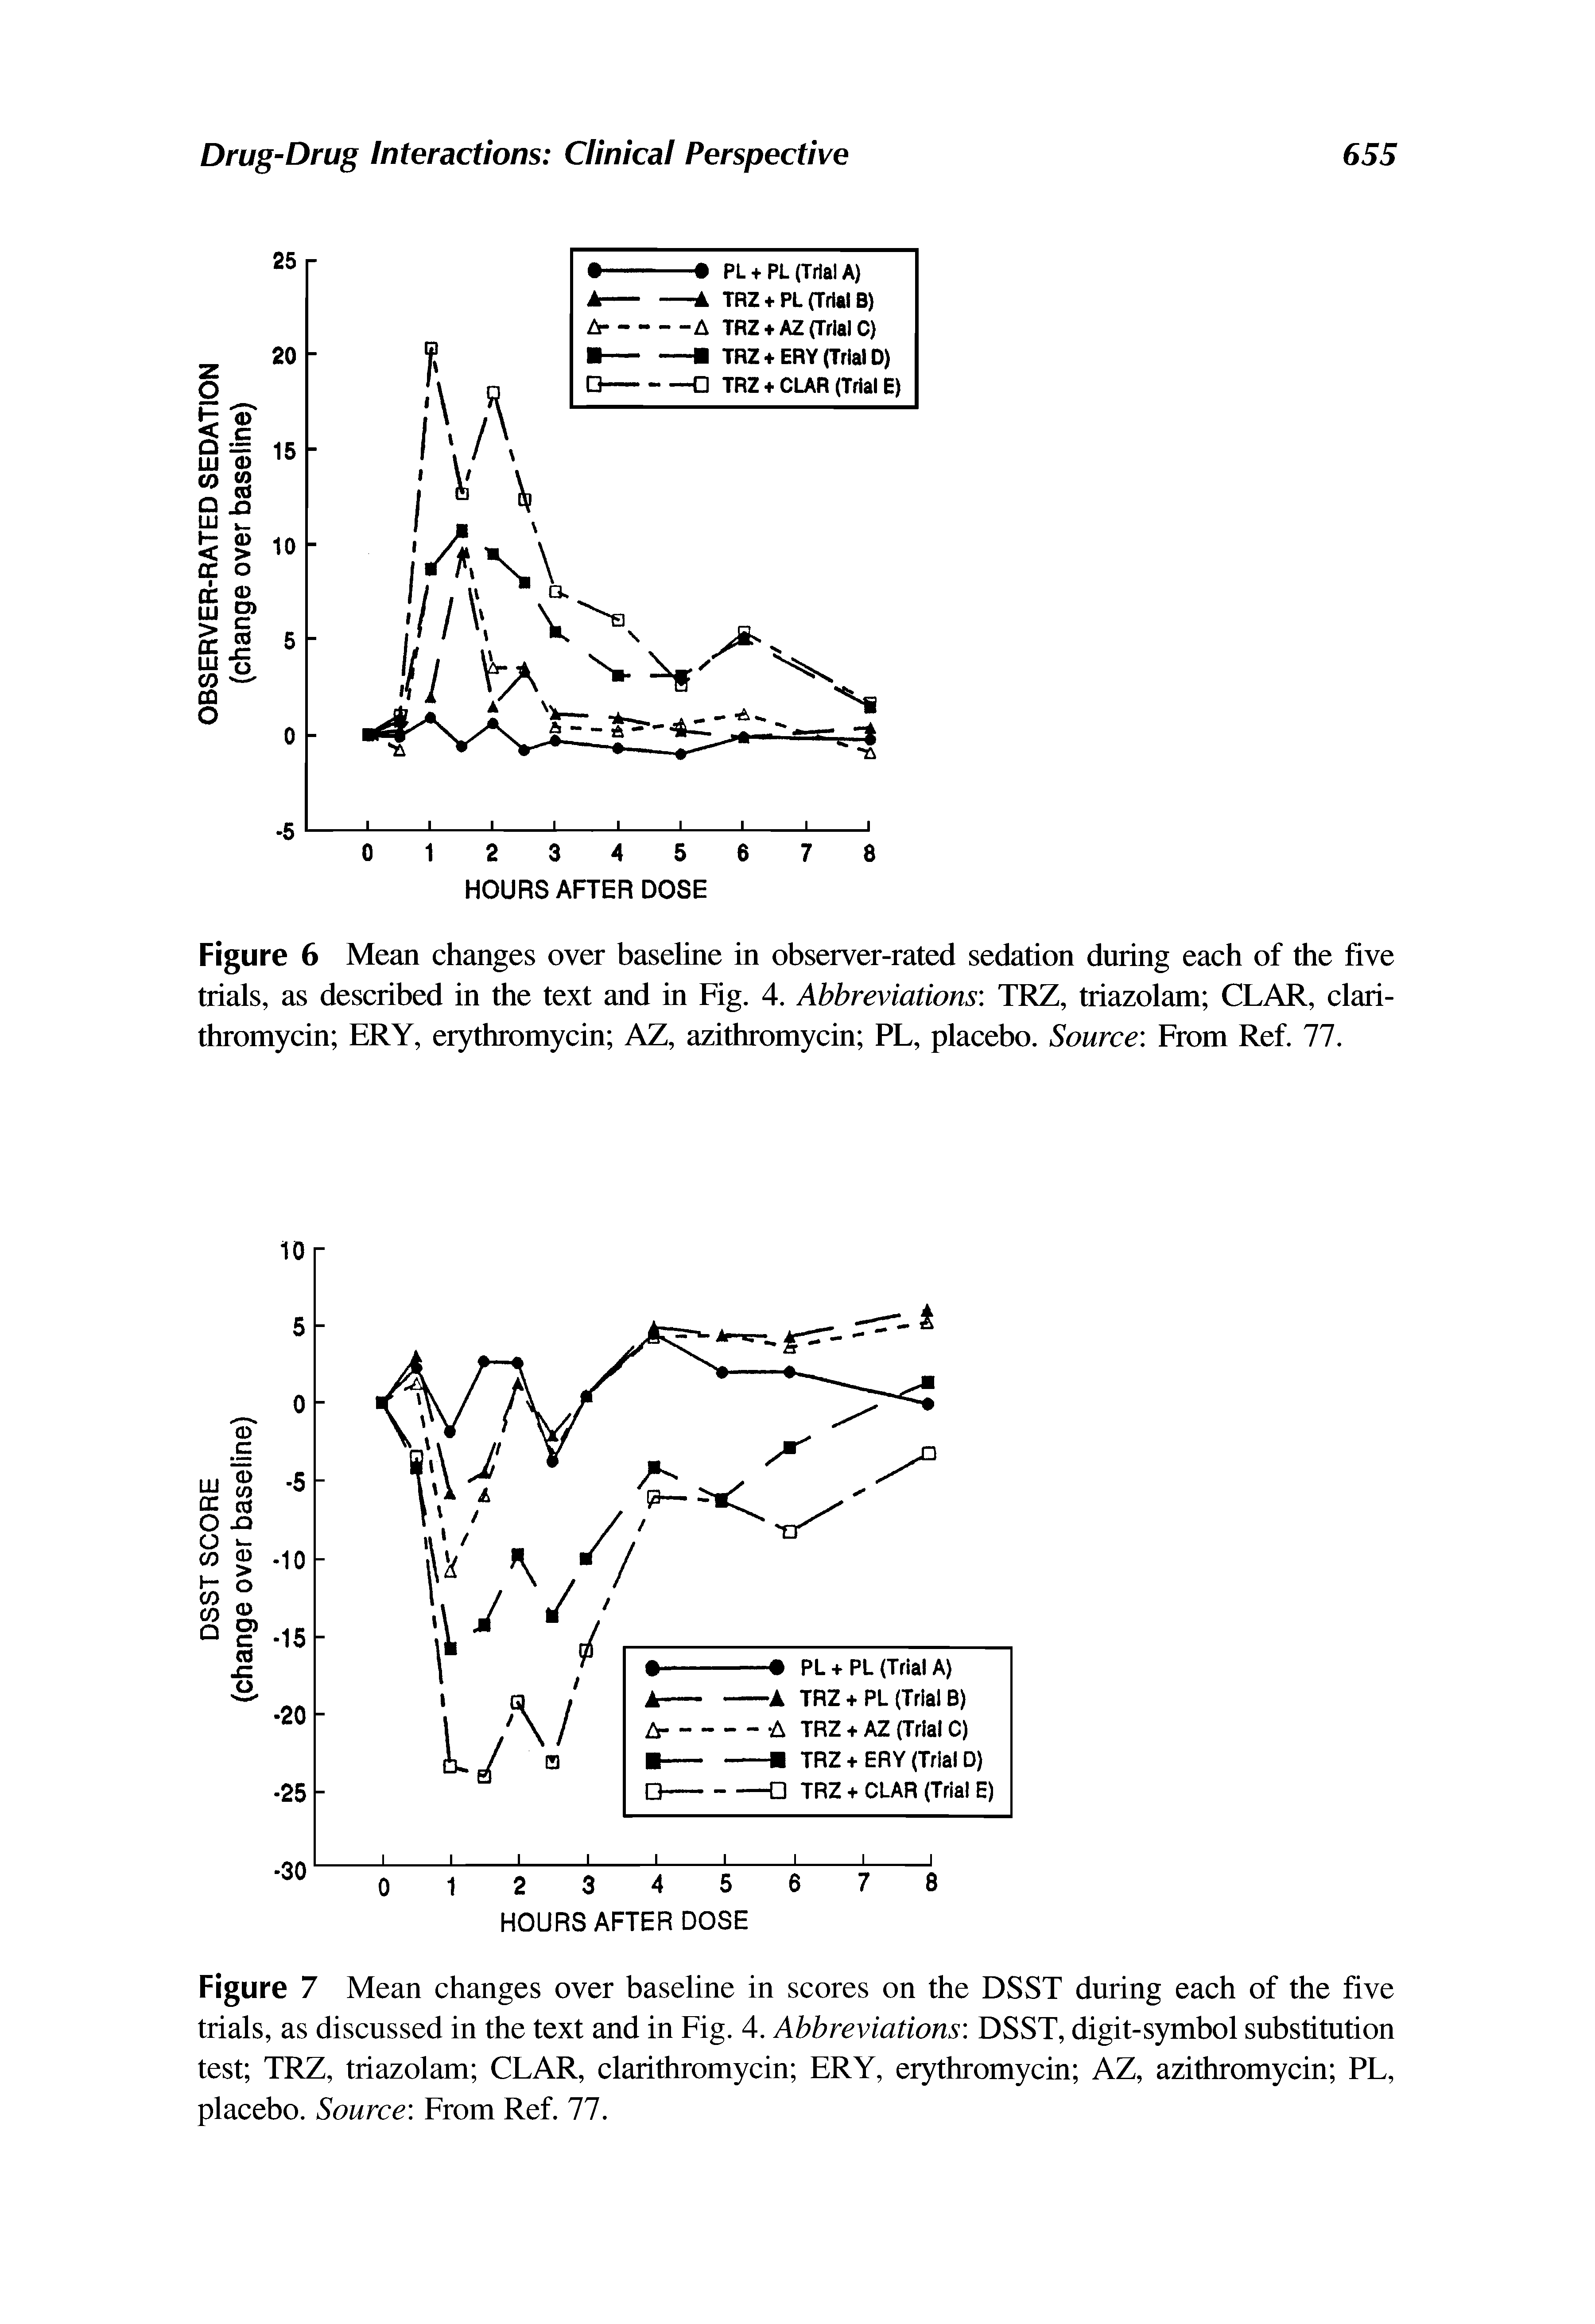 Figure 7 Mean changes over baseline in scores on the DSST during each of the five trials, as discussed in the text and in Fig. 4. Abbreviations DSST, digit-symbol substitution test TRZ, triazolam CLAR, clarithromycin ERY, erythromycin AZ, azithromycin PL, placebo. Source From Ref. 77.